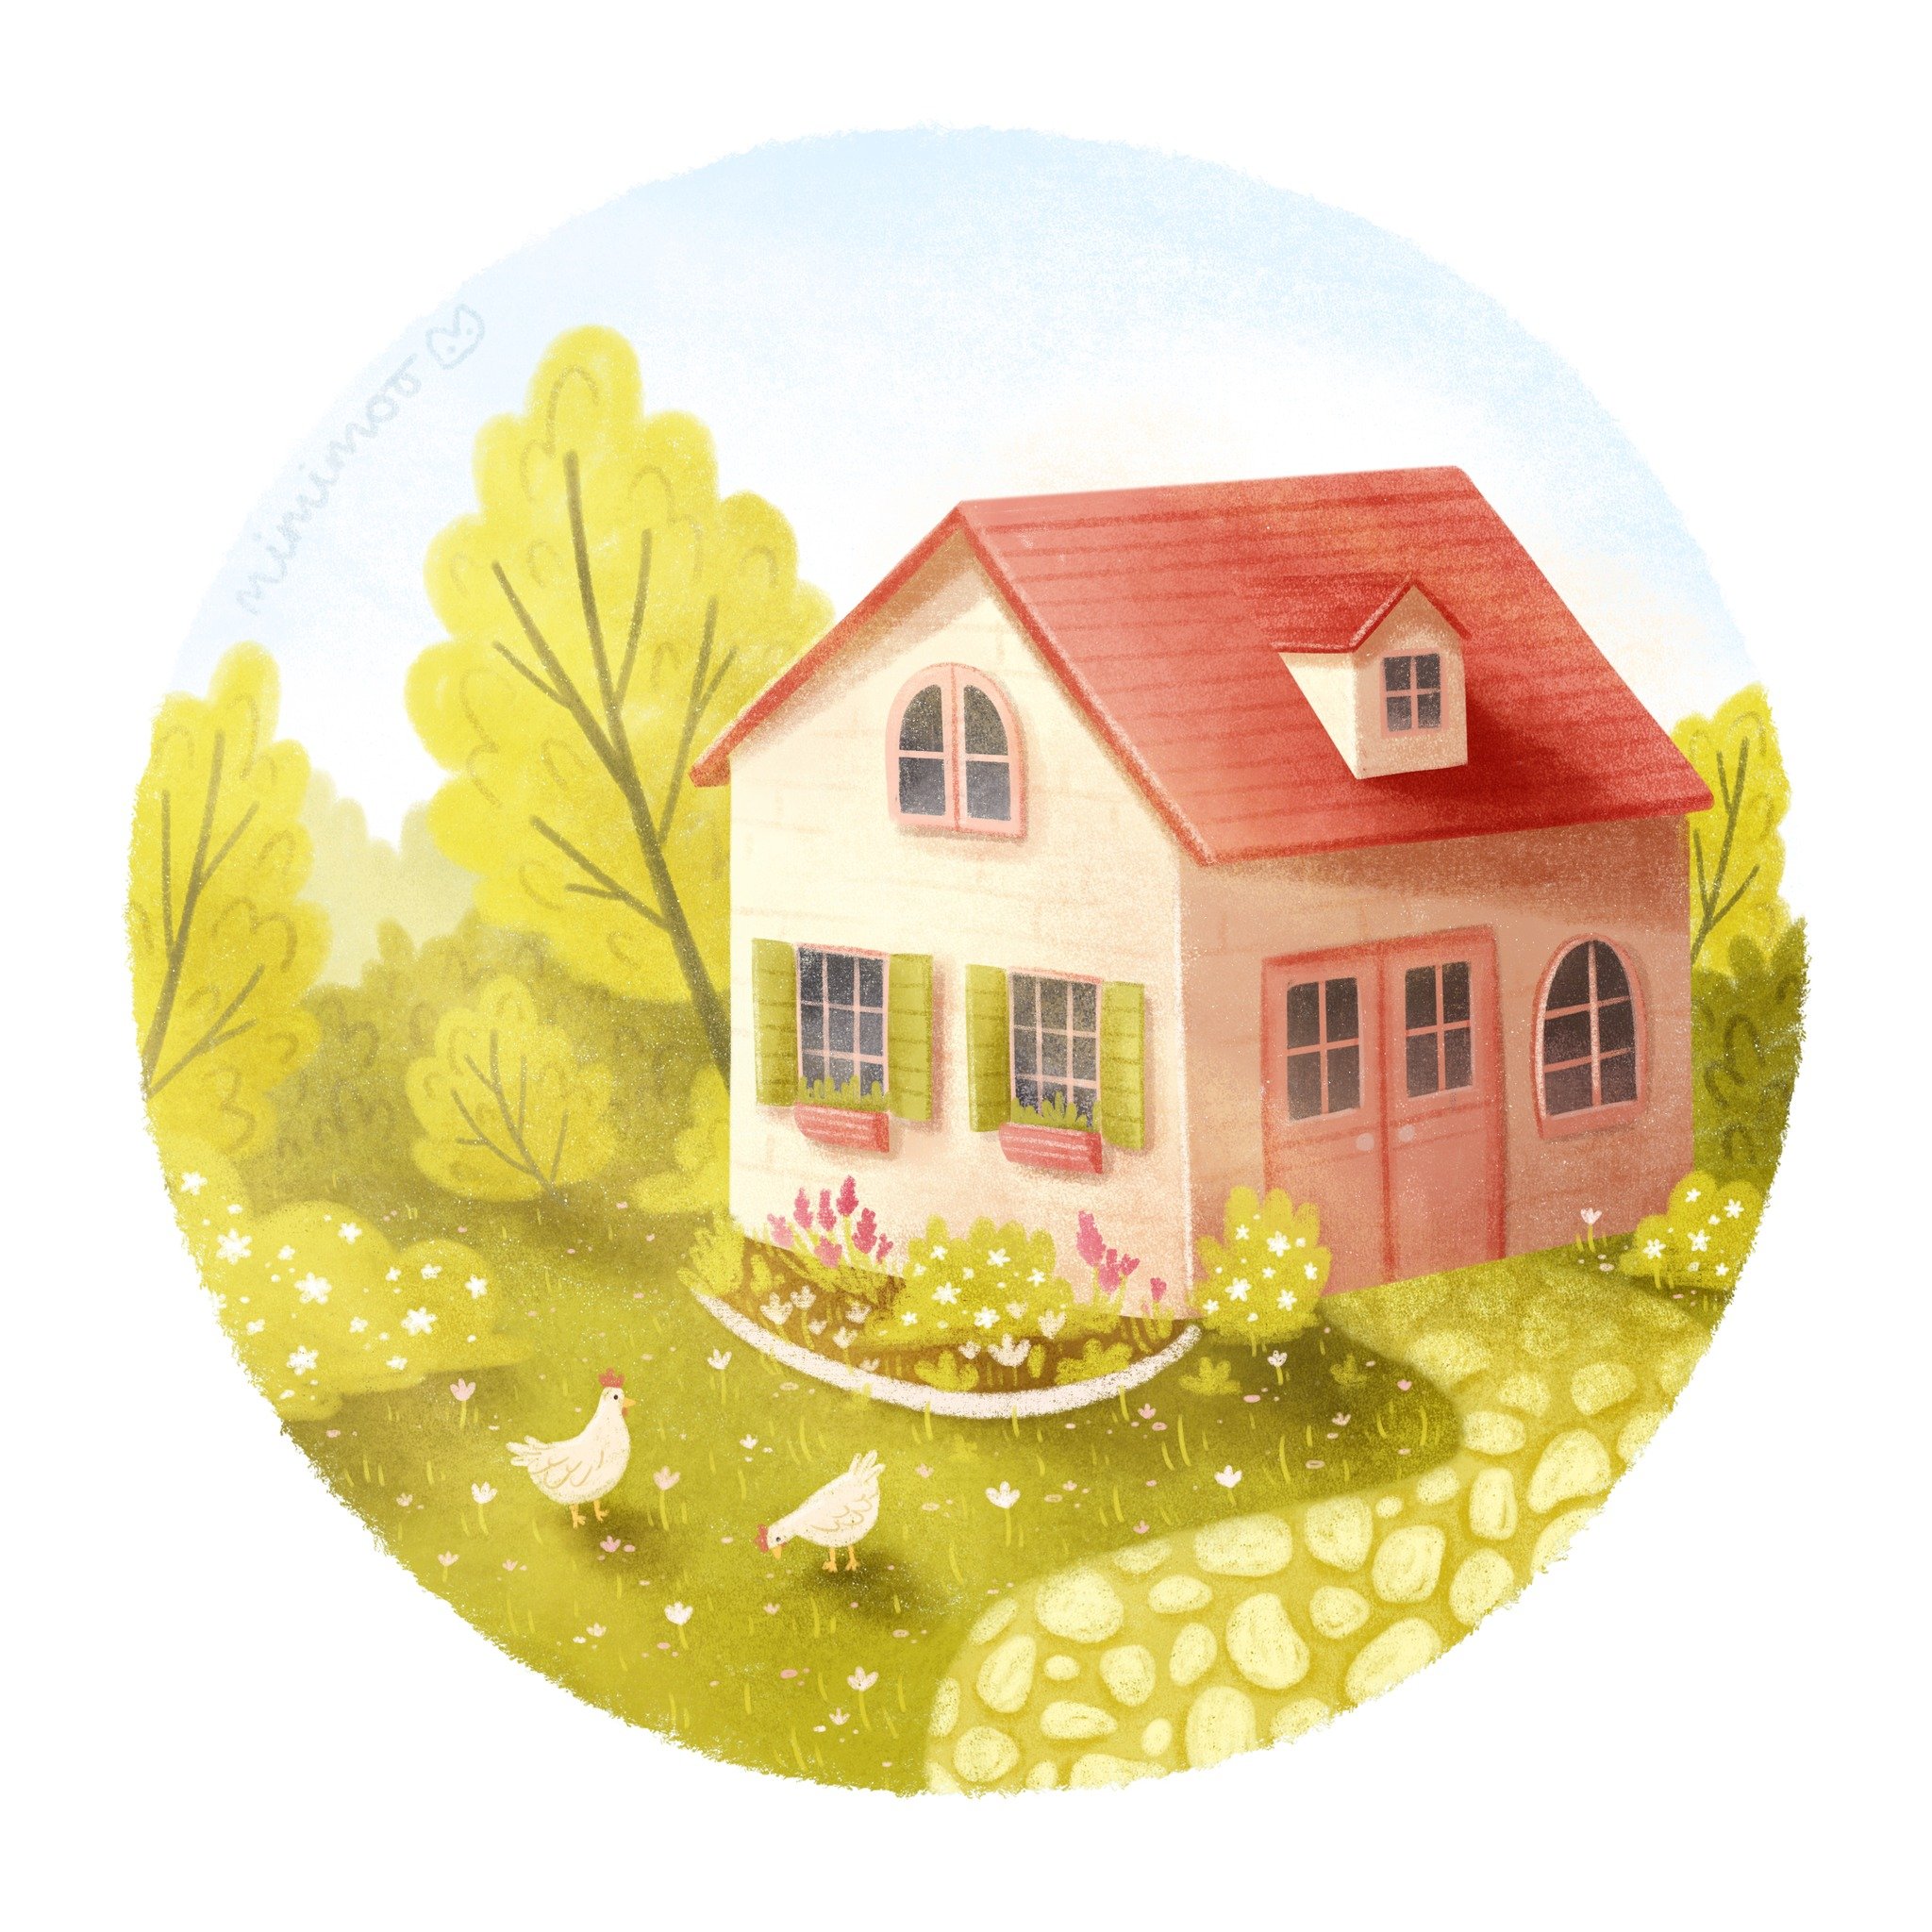 My dream cottage complete with chickens in the garden and tiny flowers everywhere 🌷💖

What's your dream home?

Brushes I used (from my brush packs):
🌷 Mimi Simple Sketching for initial sketch
🌷 Mimi Marker Pen and Textured Pencil for colouring sh